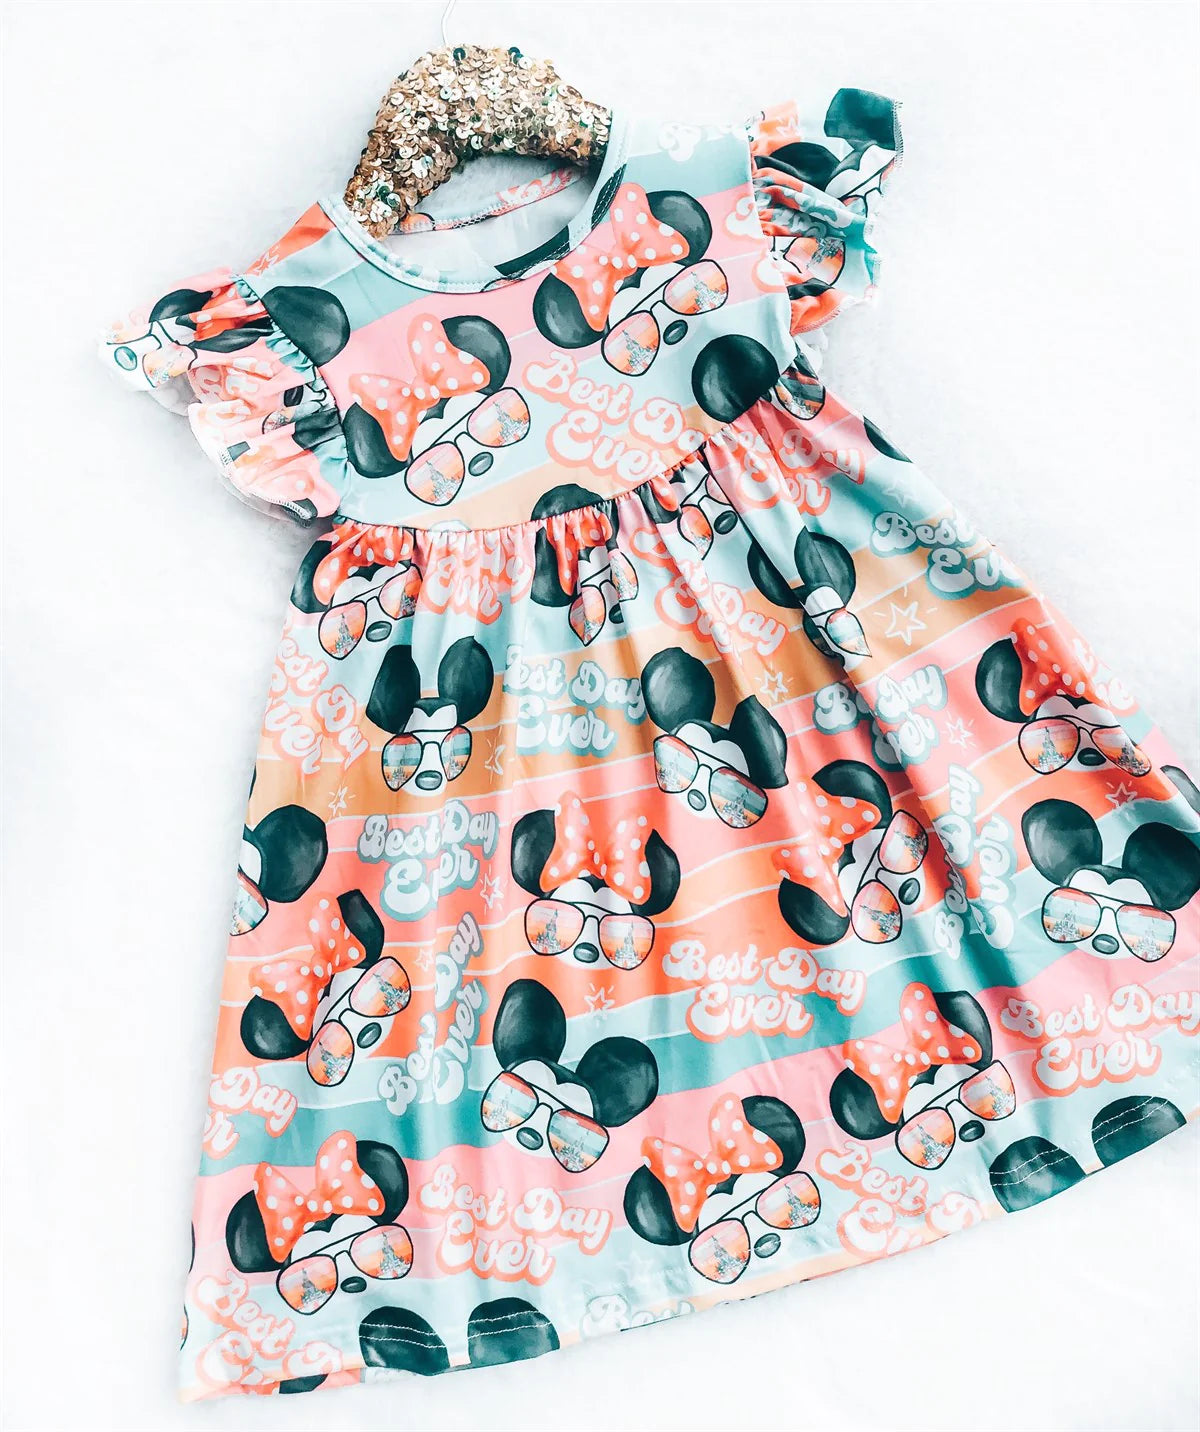 Mouse Dress - Best Day Ever!